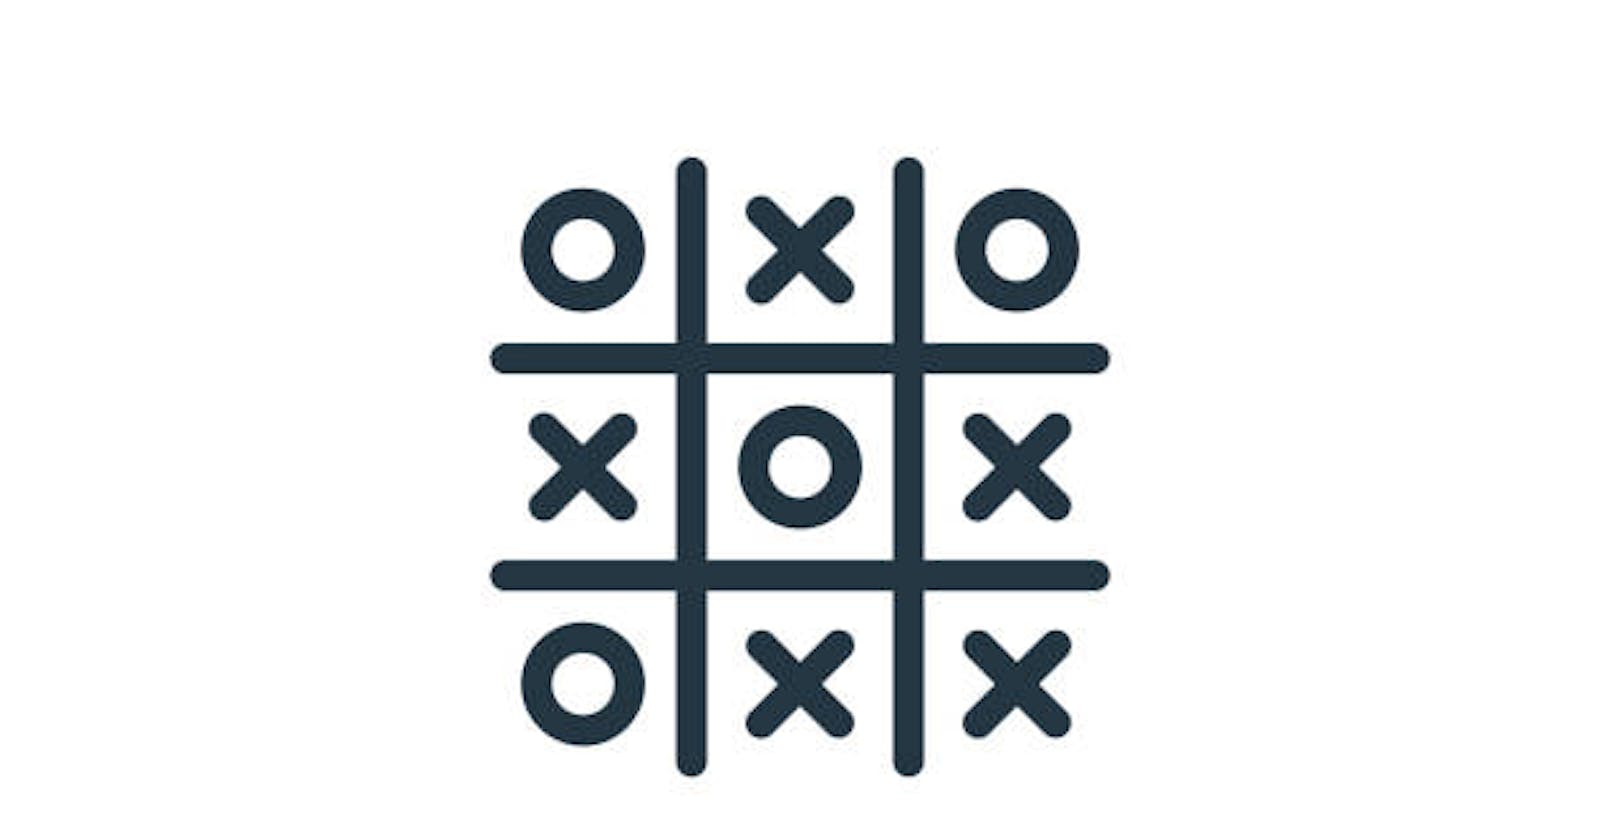 How to create tic-tac-toe game in Java